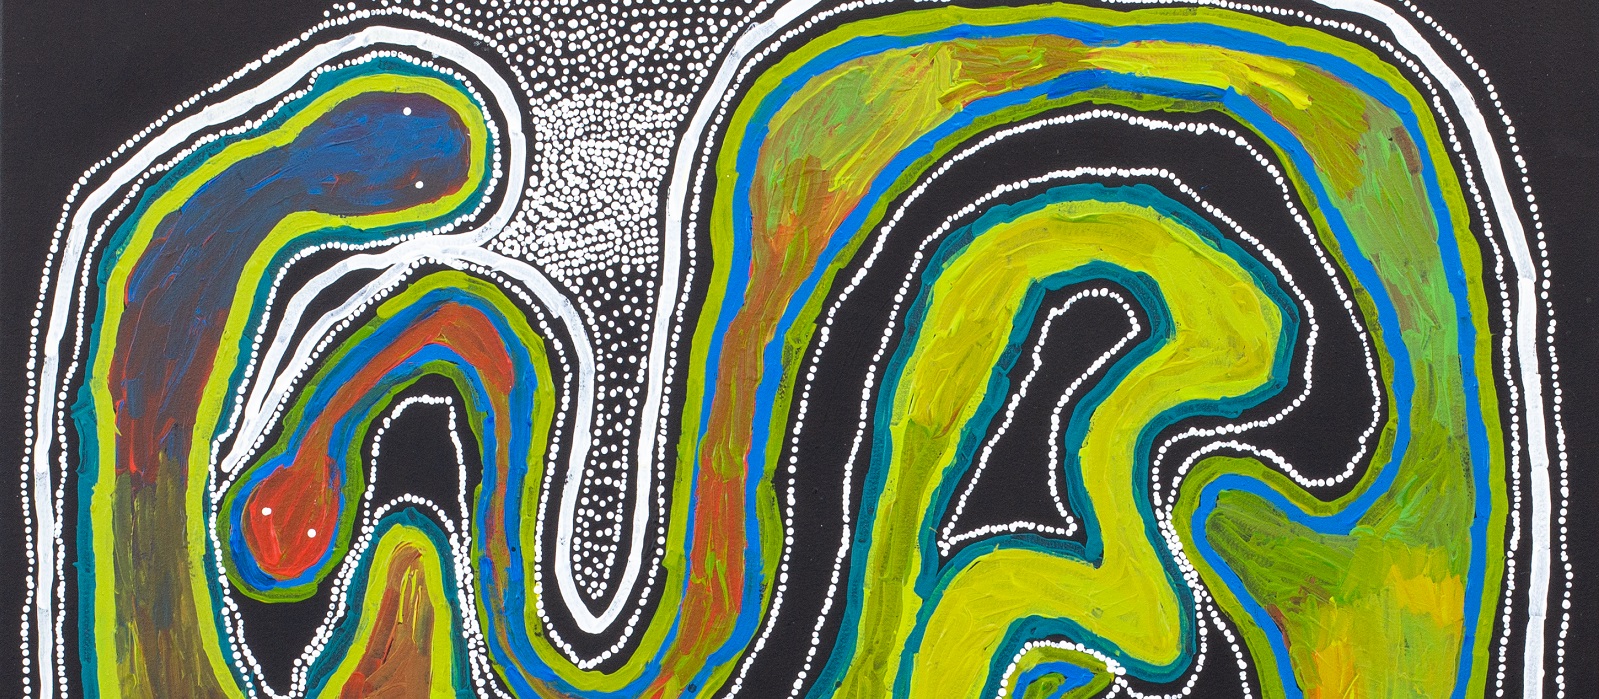 Dora Parker, Pukara (detail), 2021, acrylic on canvas, 110 x 85cm. Image courtesy the artist and Spinifex Arts Project